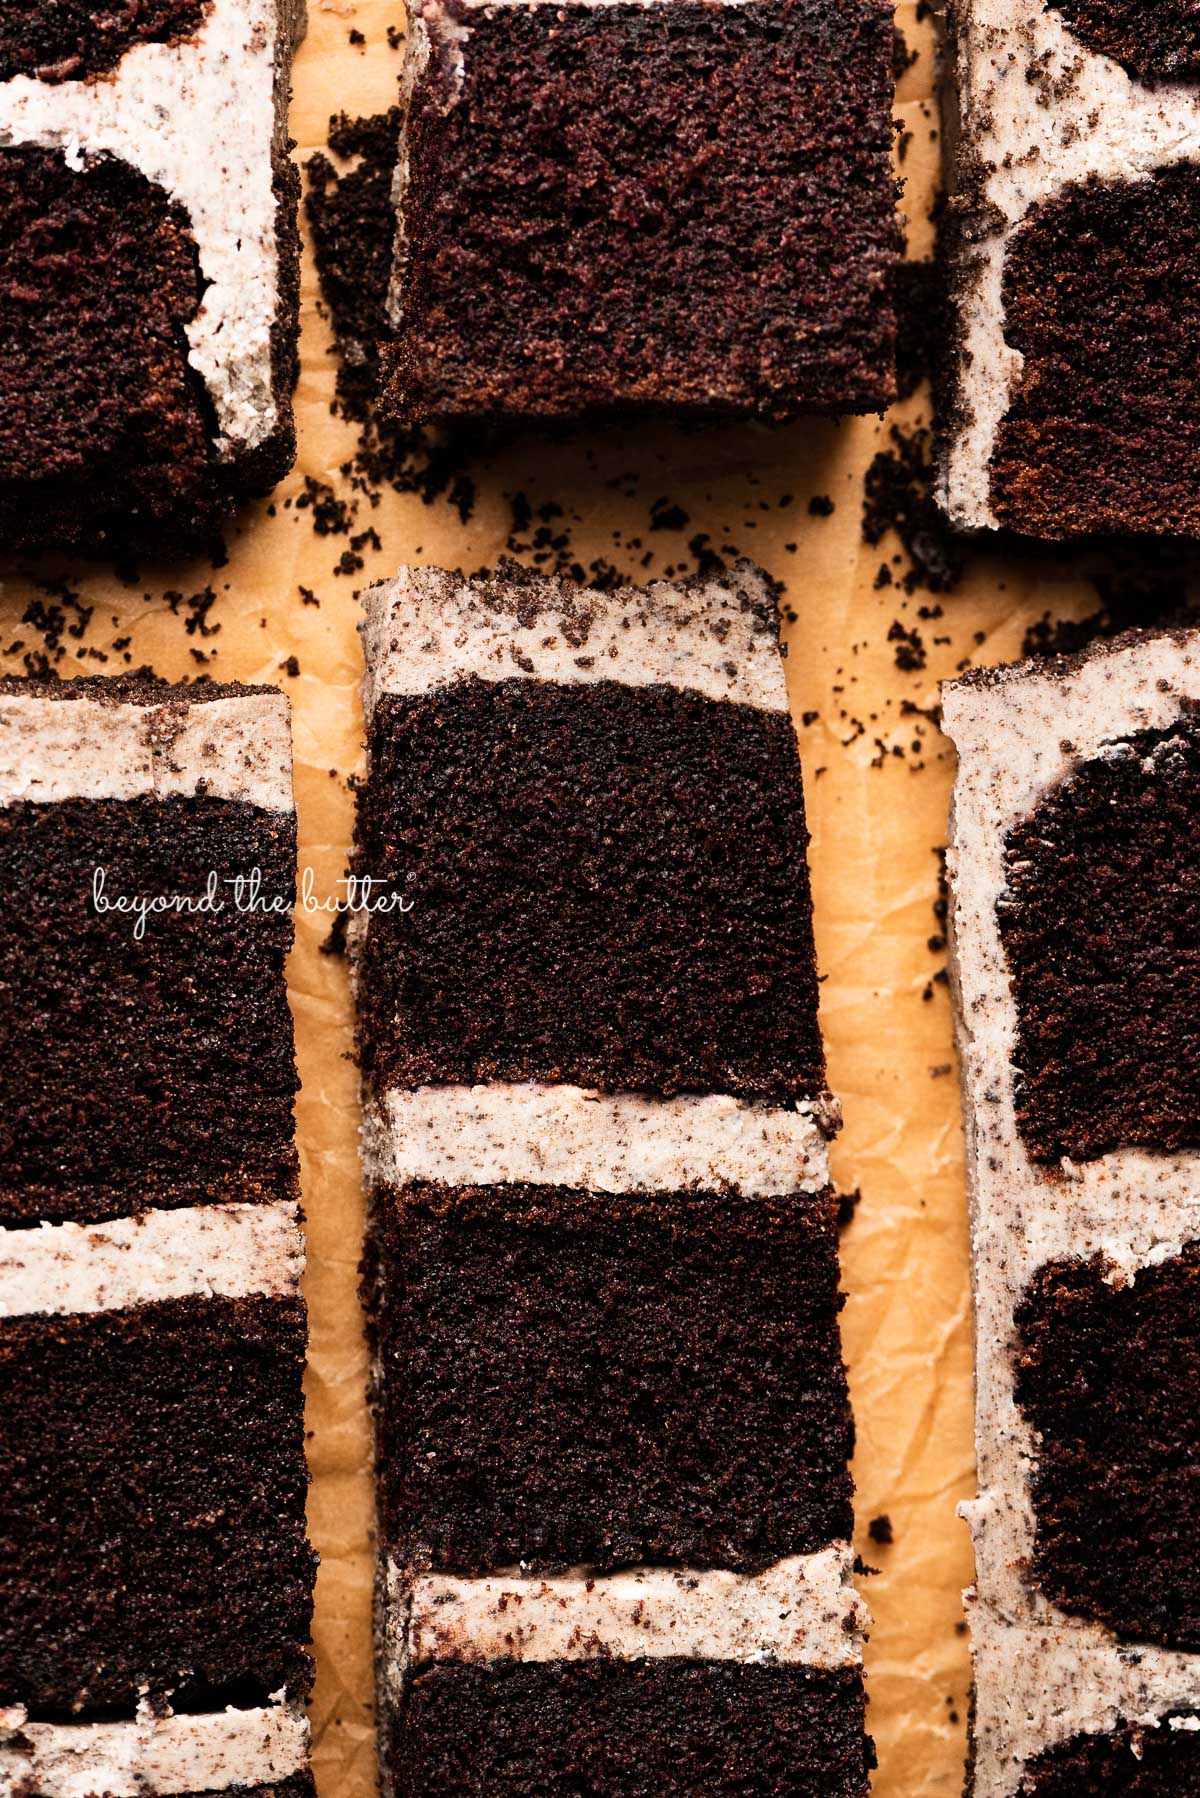 Slices of chocolate cake with oreo buttercream frosting on natural parchment paper.